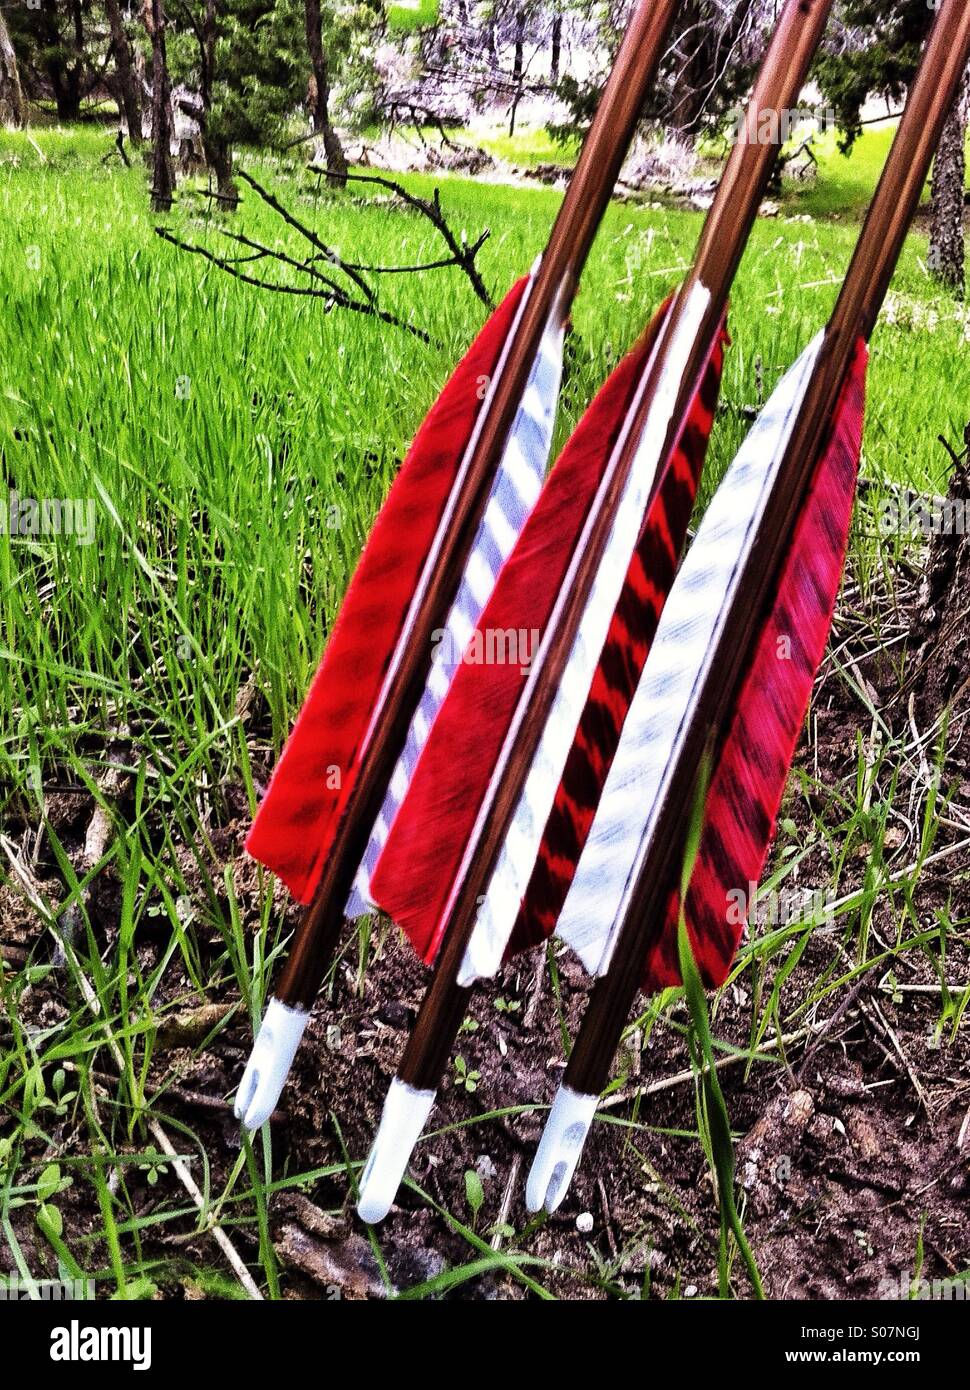 Closeup of colorful fletching on arrows in  a lush natural setting. Stock Photo